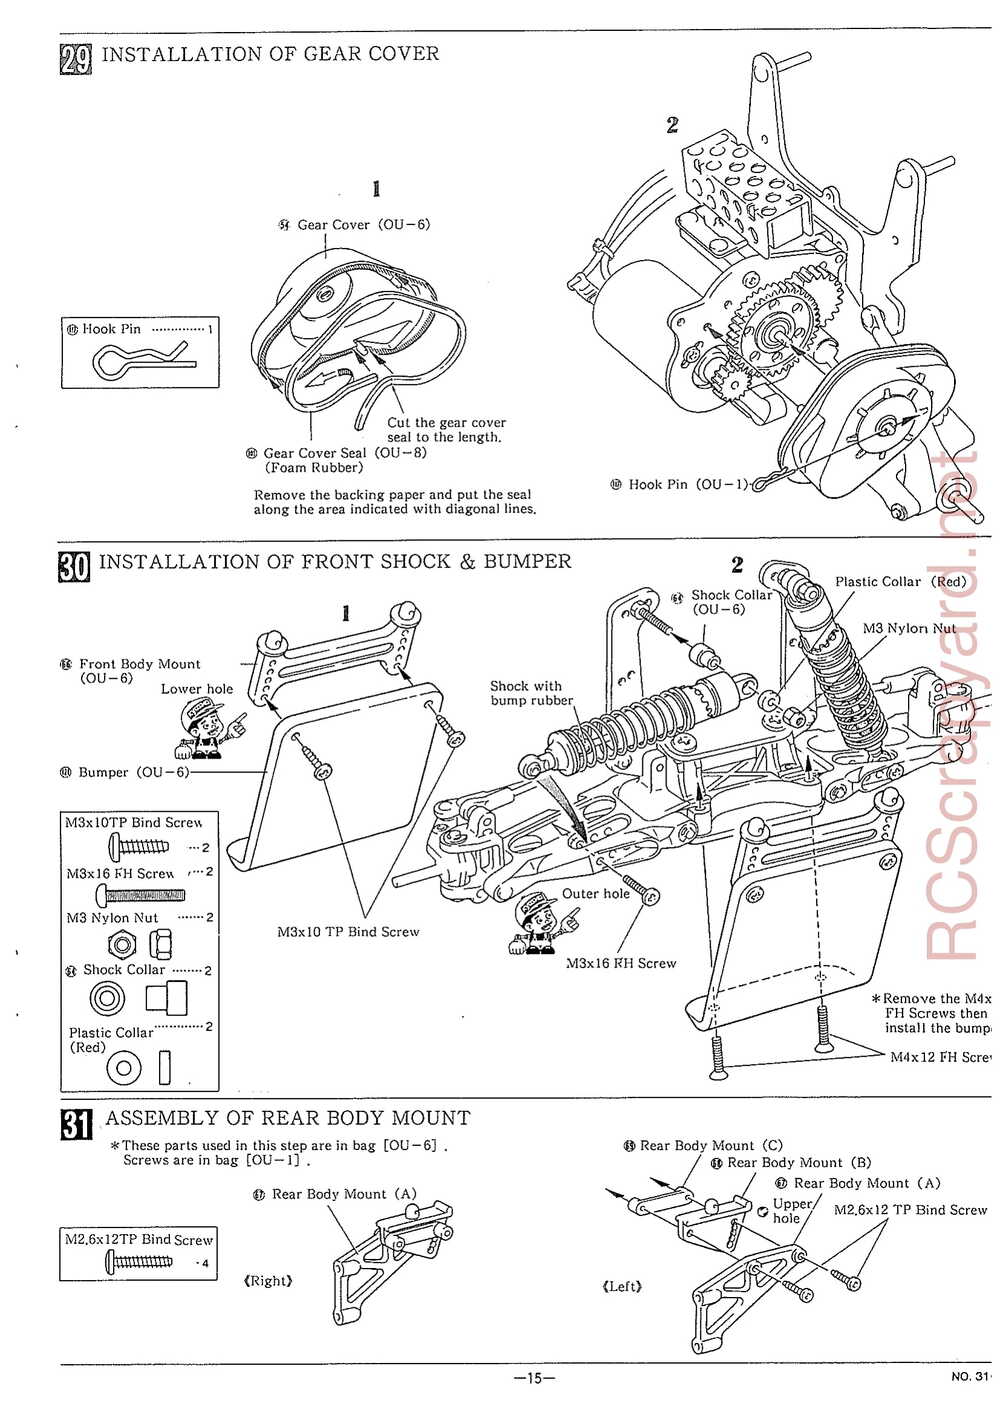 Kyosho - 3166 - Outlaw-Ultima Truck - Manual - Page 19